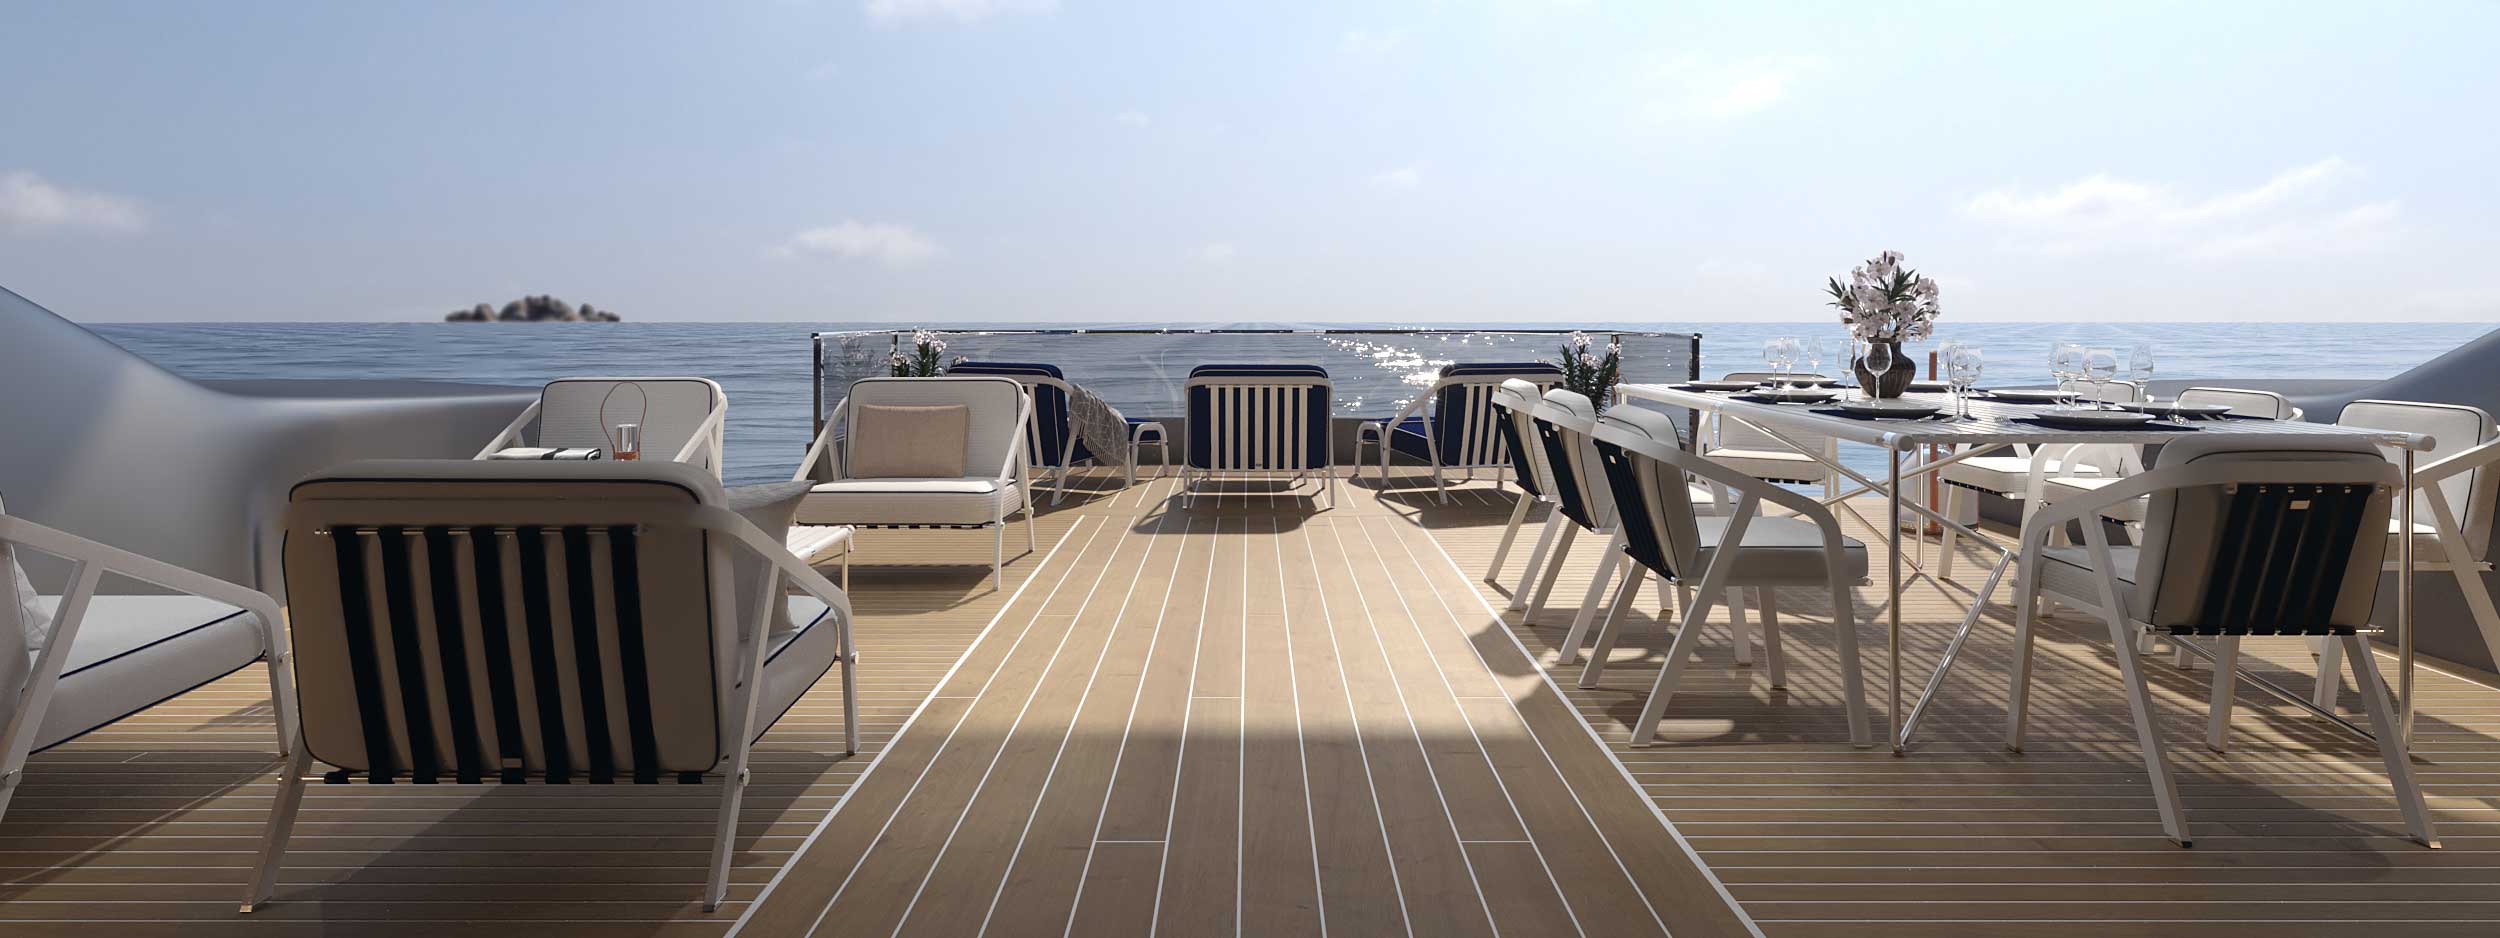 Image of aft deck of superyacht with Ribbon lounge & dining chairs by Myface